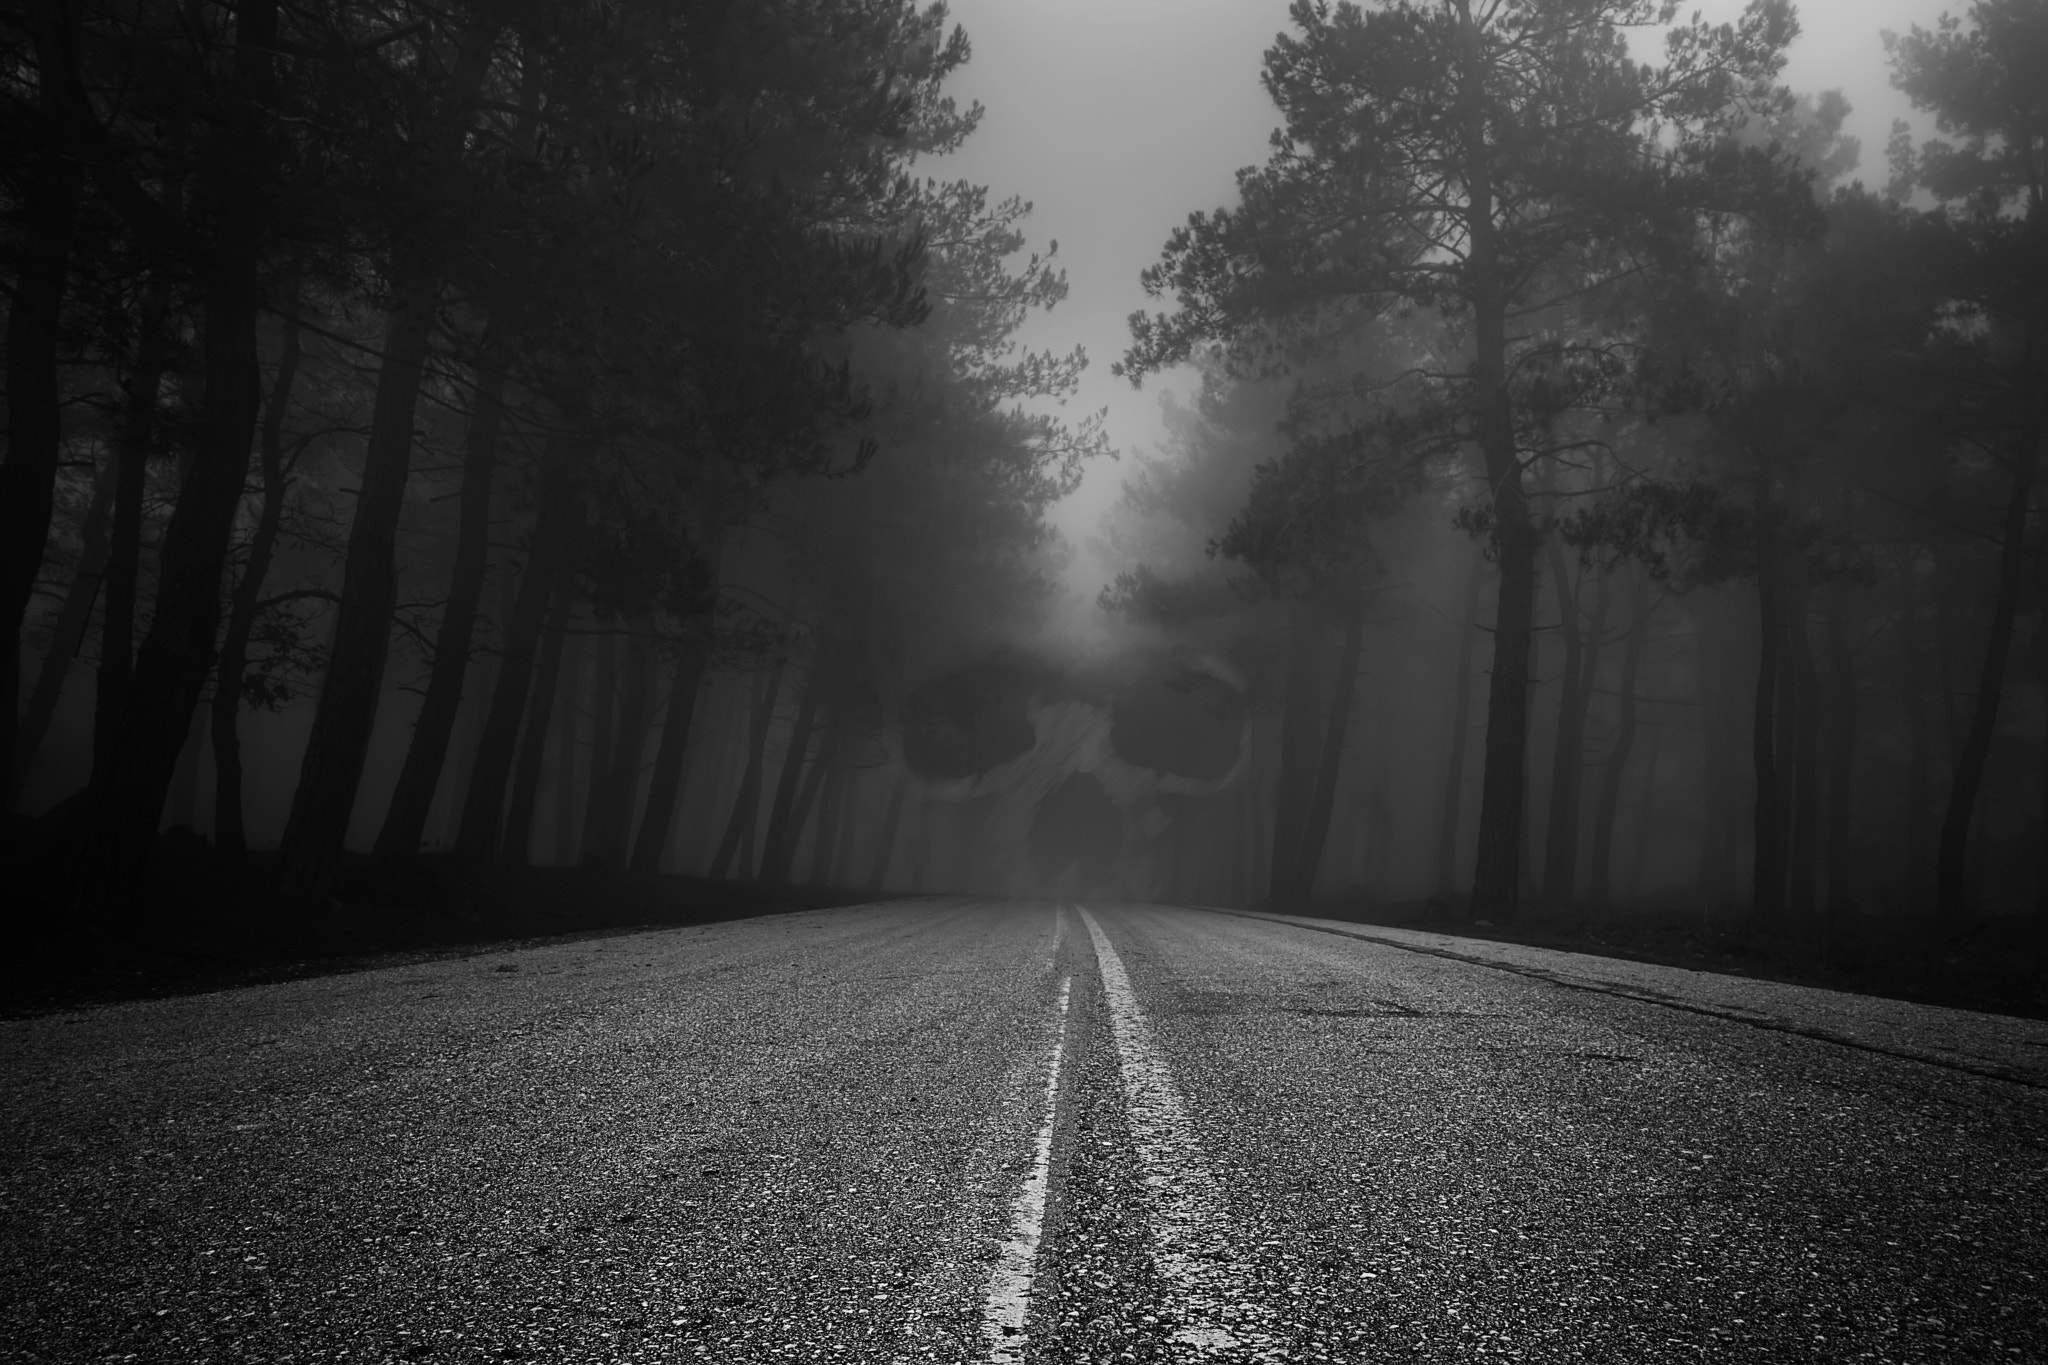 Dark Road in a Misty Forest by George Mast / 500px